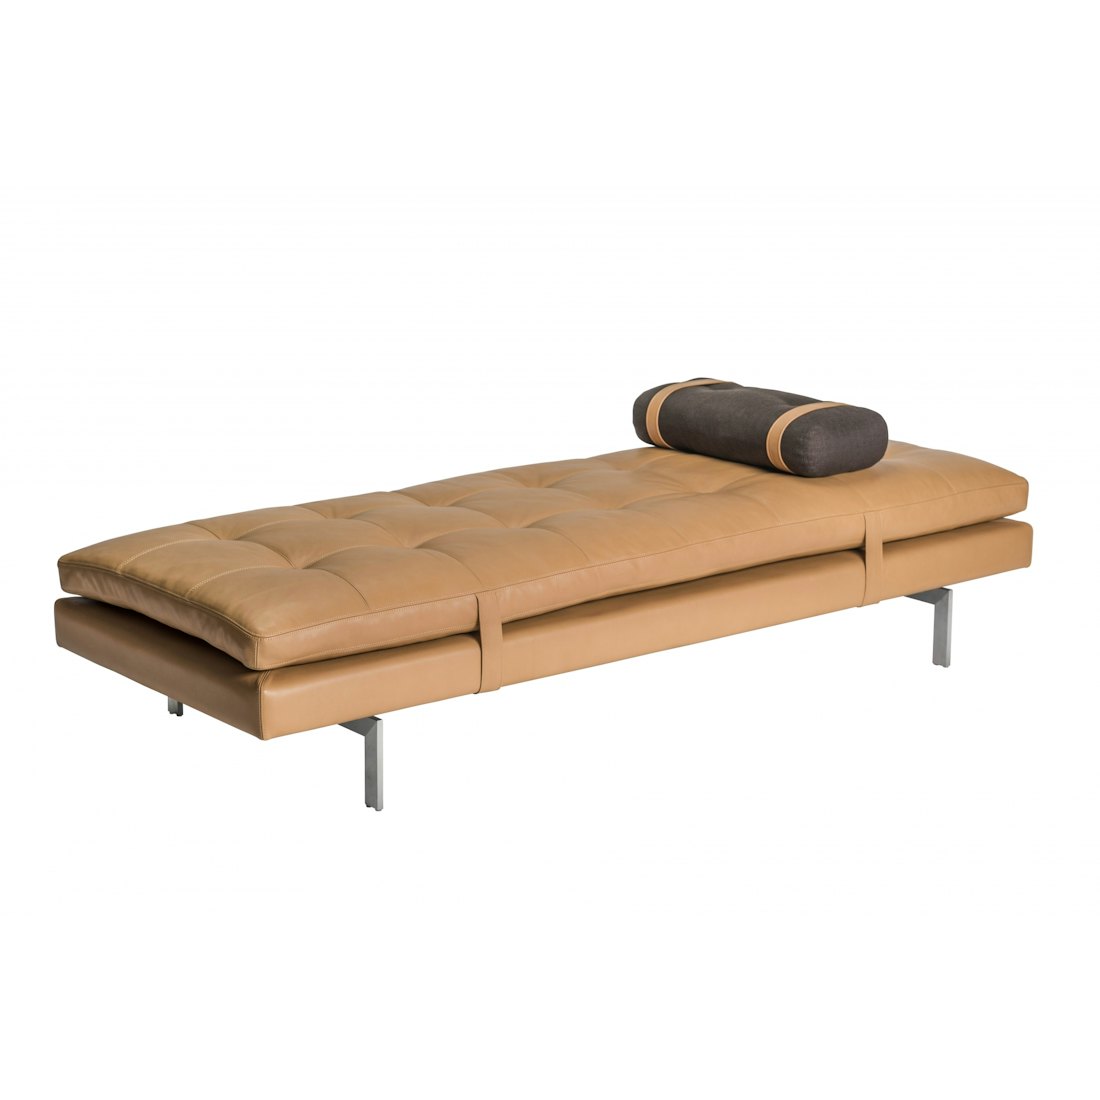 Sren Lund Daybed Dicentra, Relax H-pude (flad), Timm Møbler